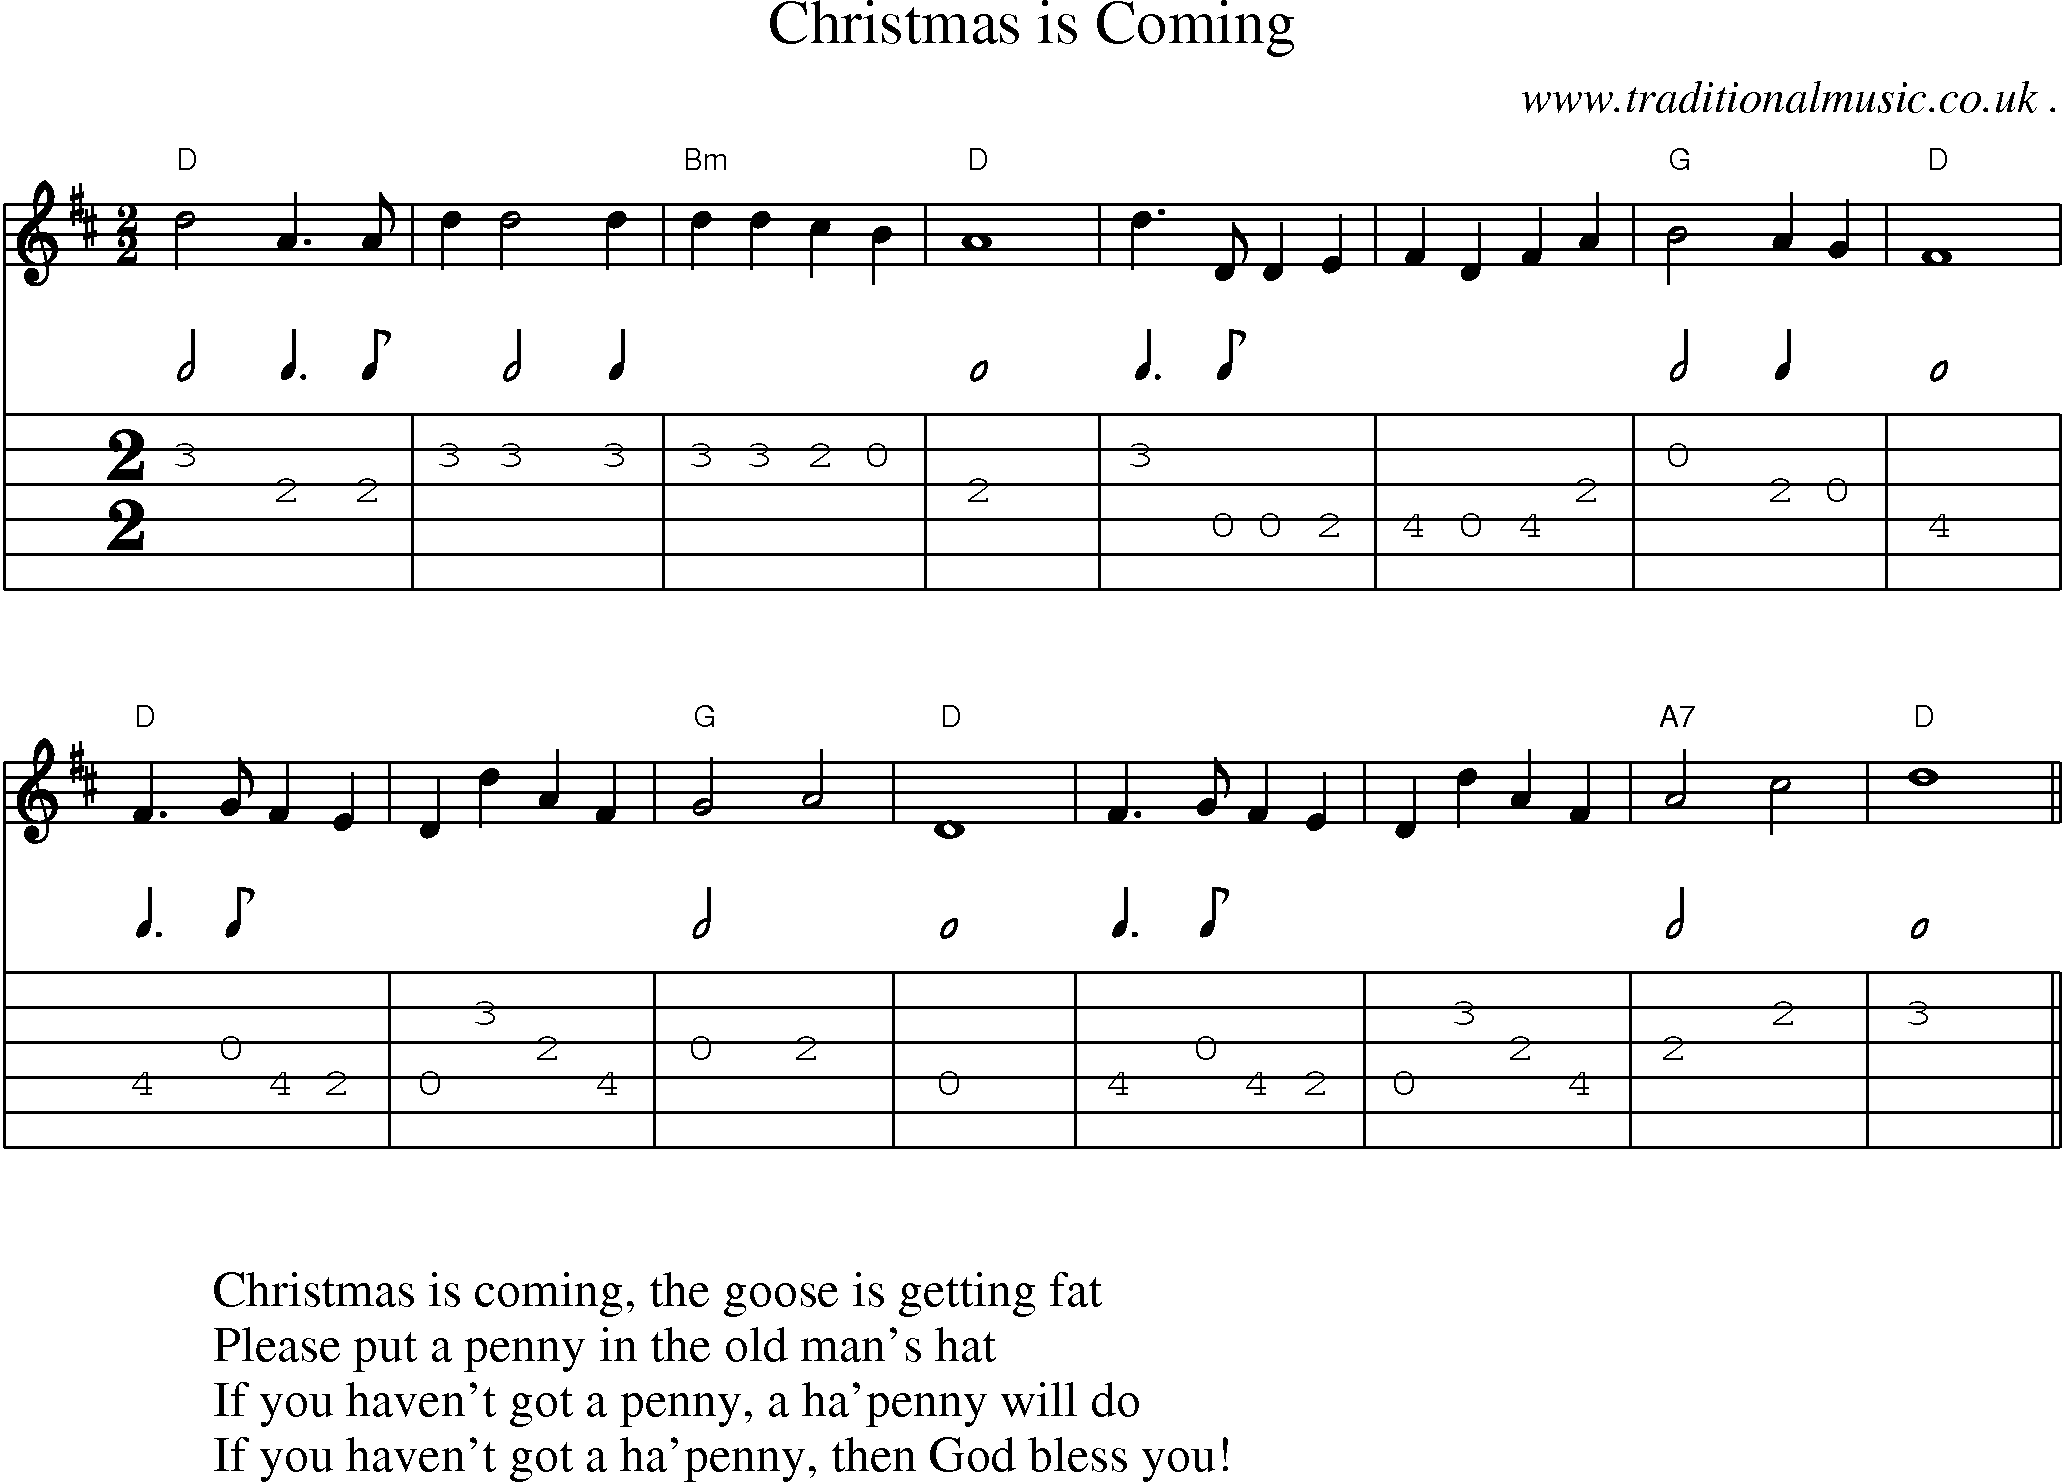 Music Score and Guitar Tabs for Christmas is Coming